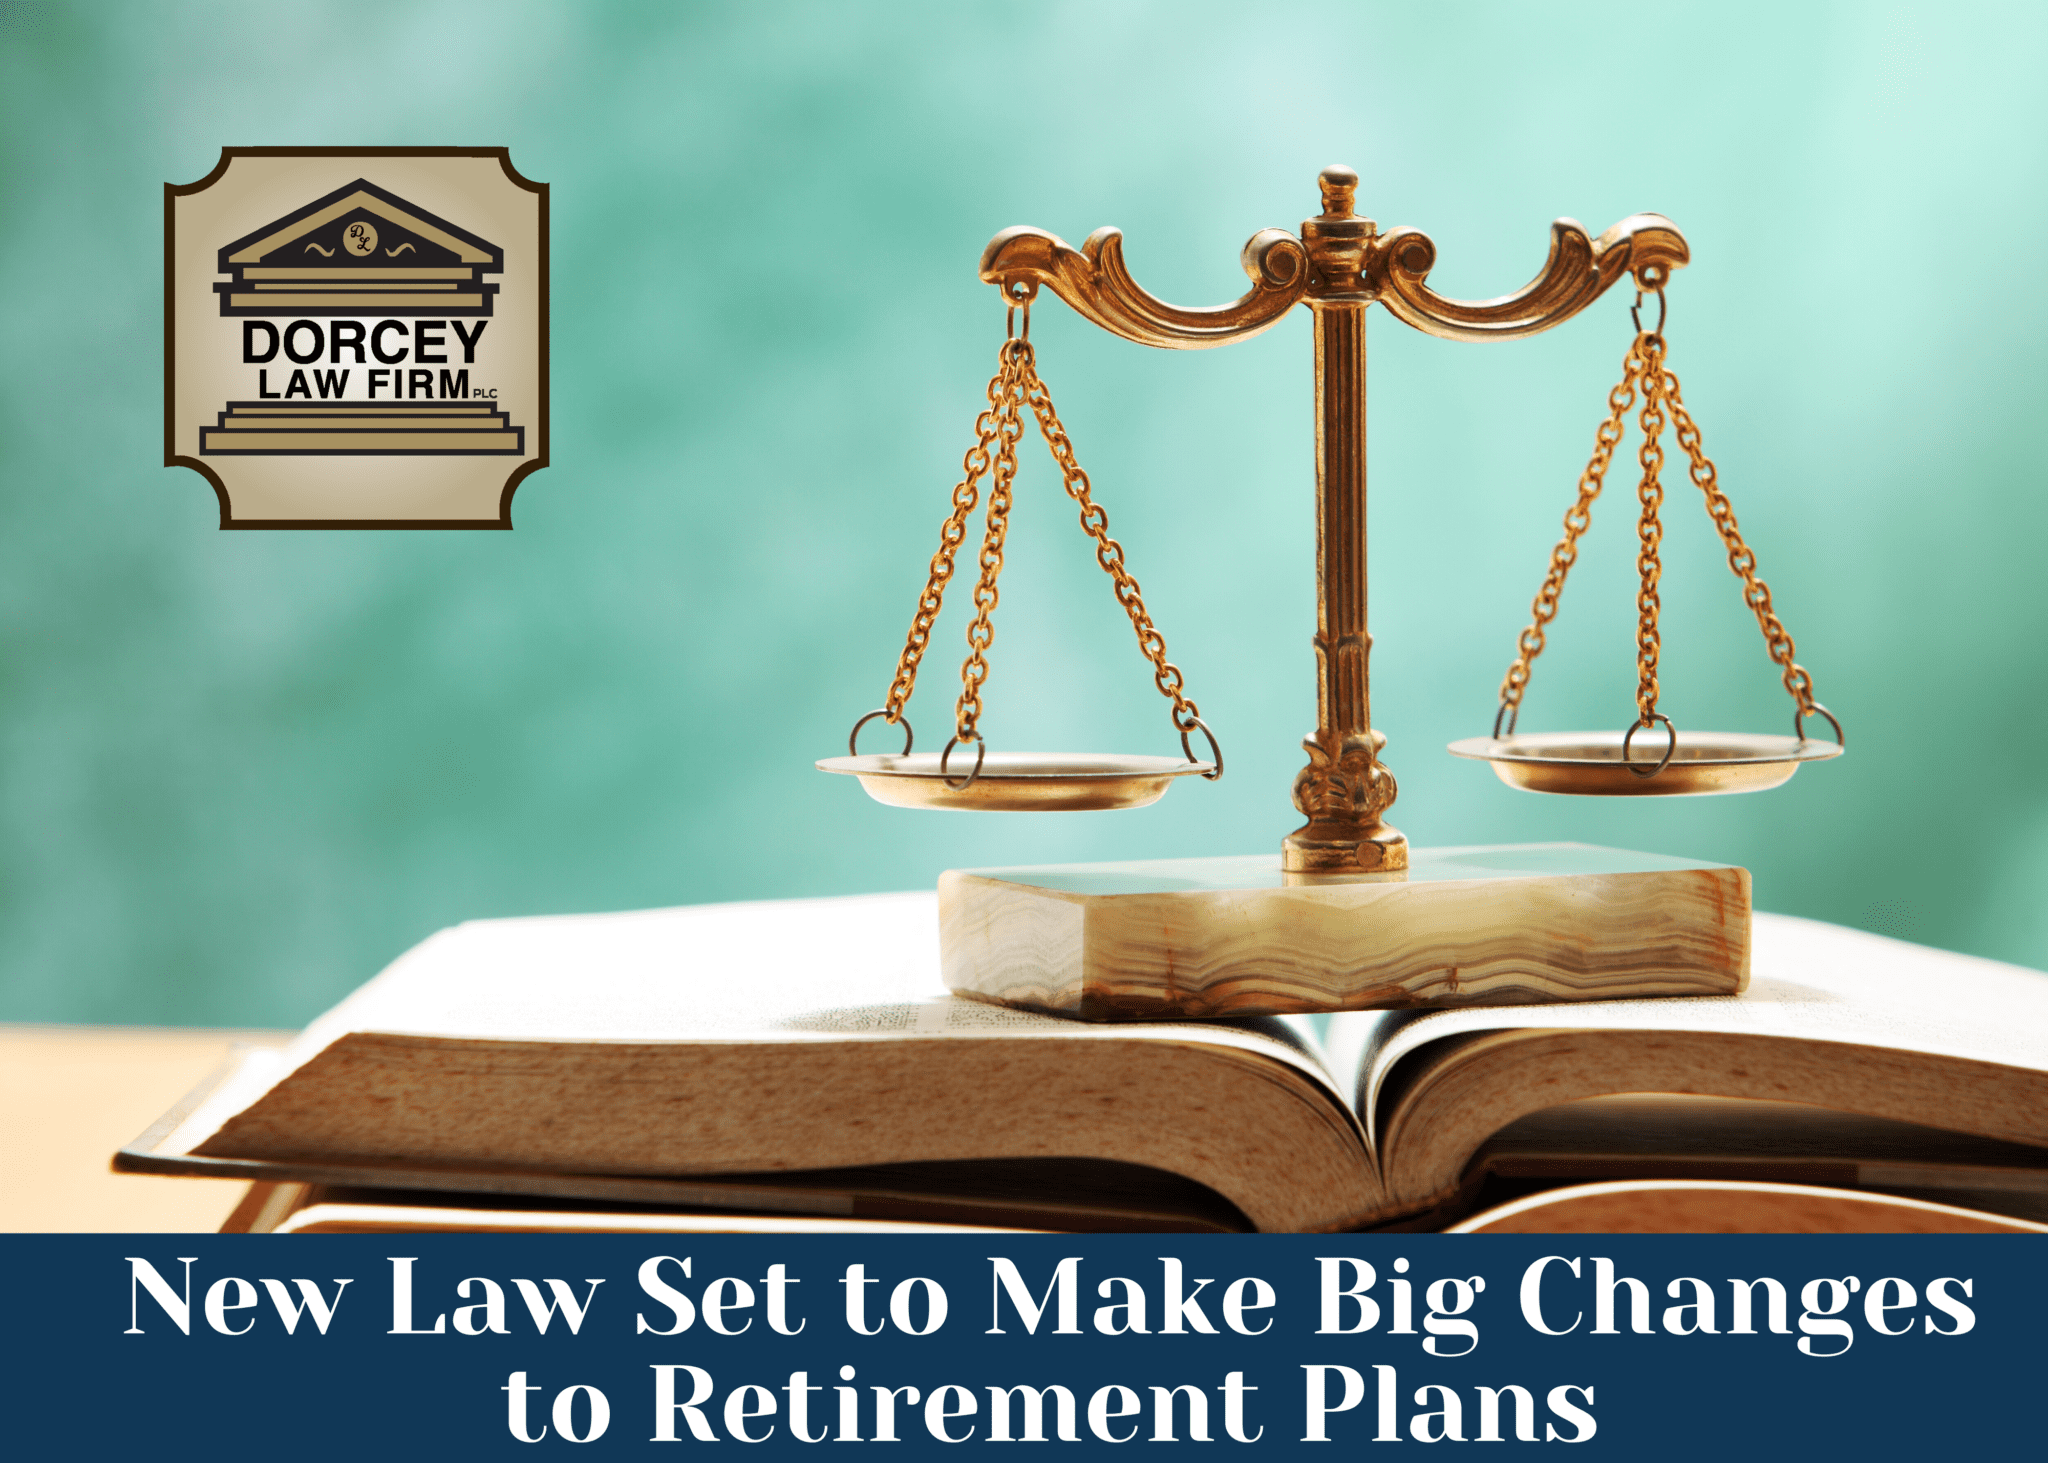 New Law Set to Make Big Changes to Retirement Plans